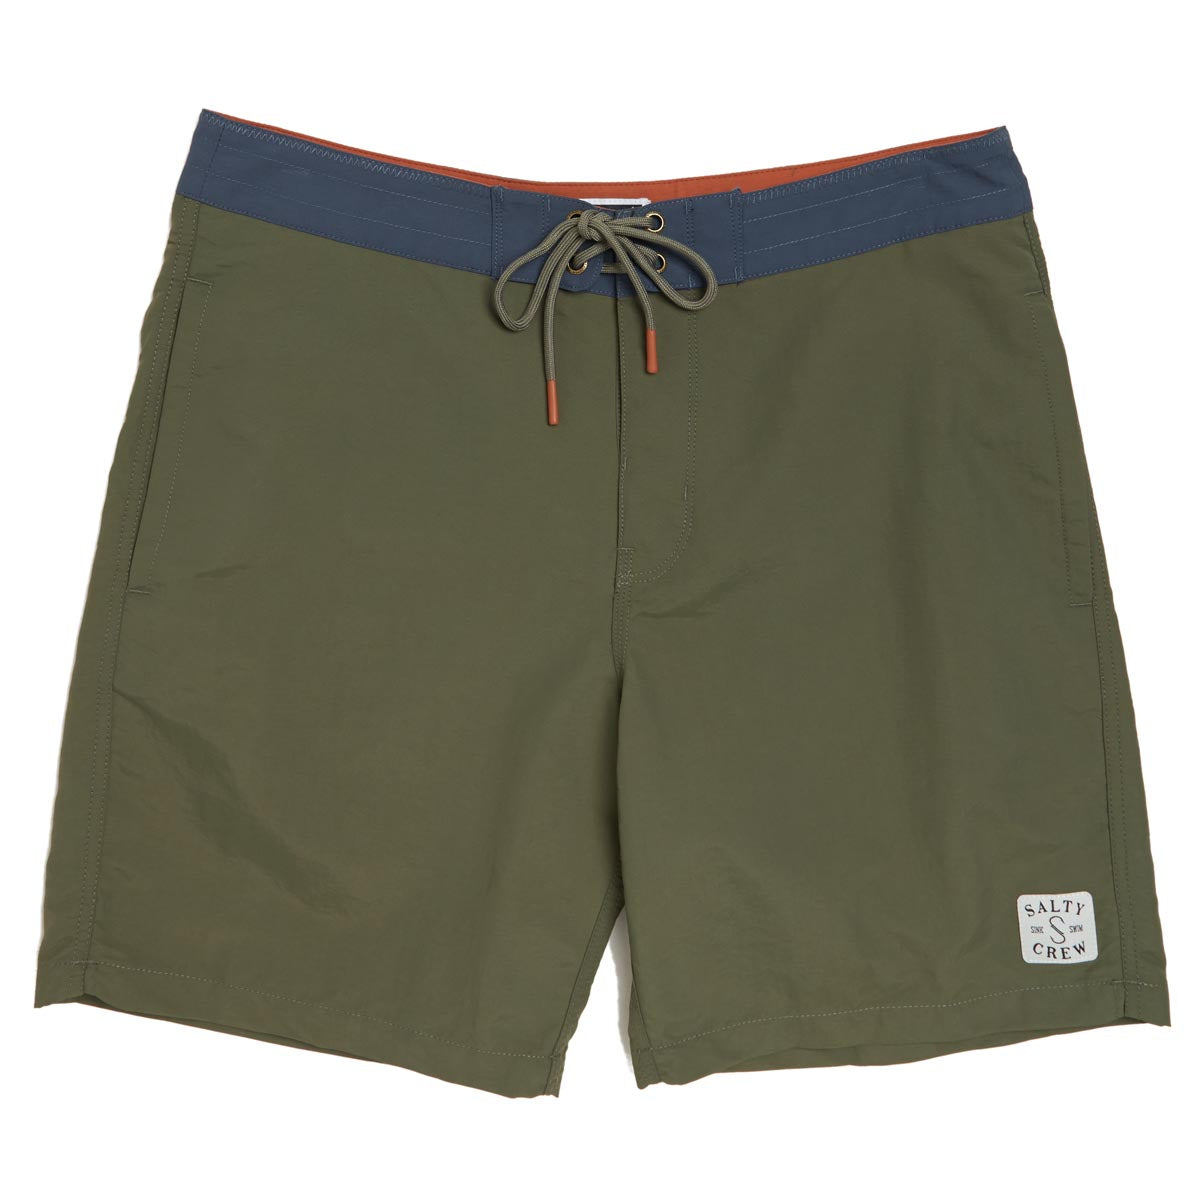 Salty Crew Clubhouse Board Shorts - Olive image 1